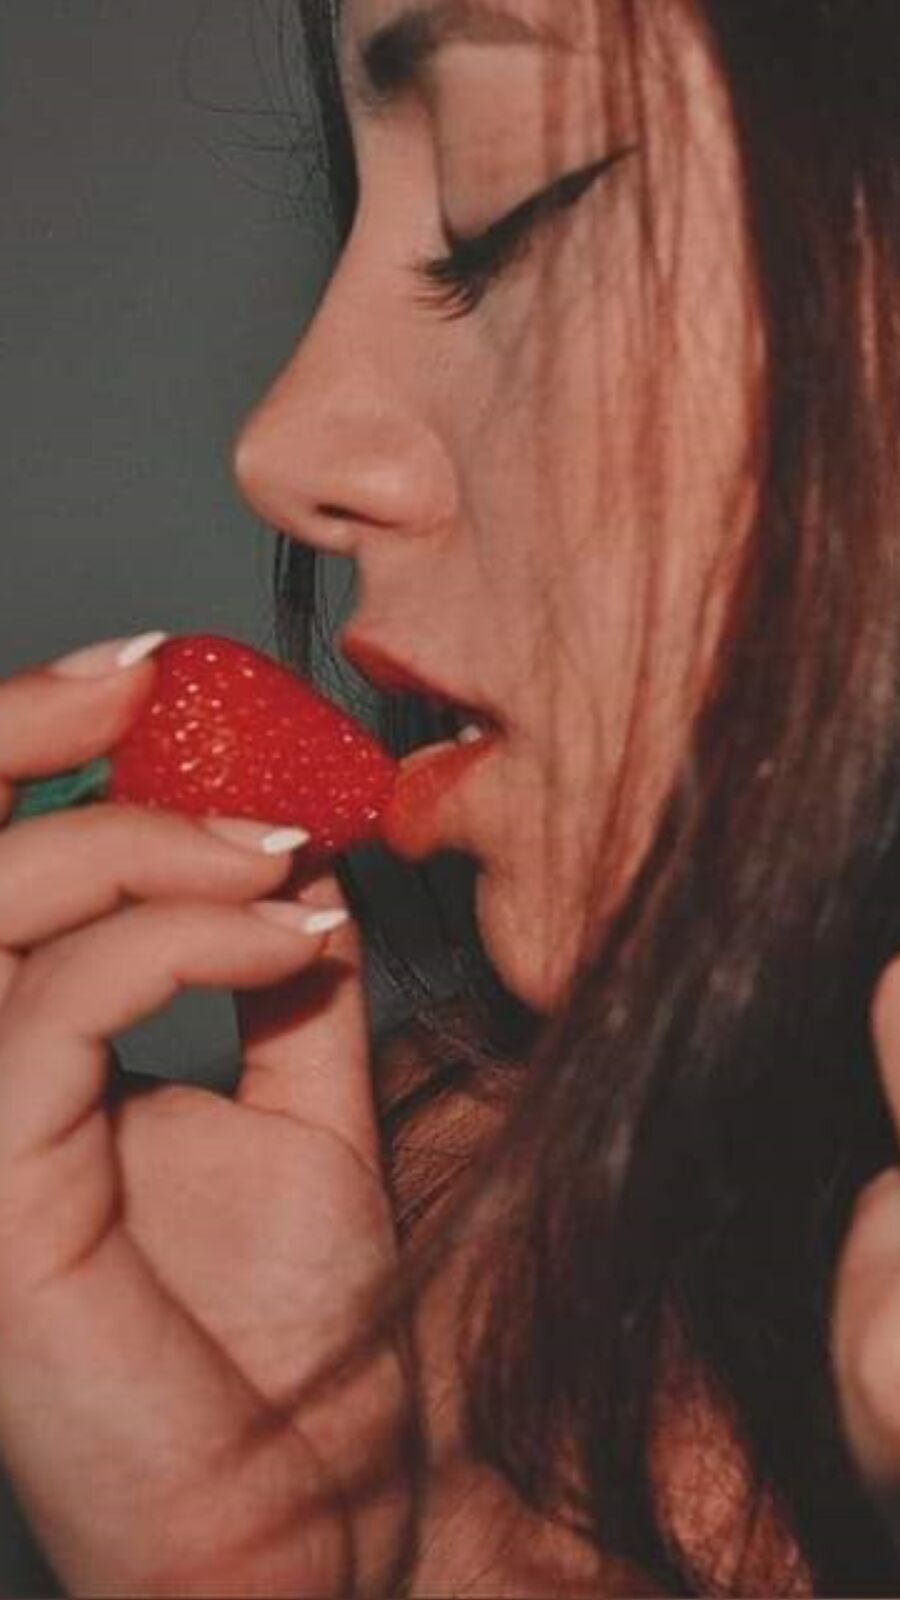 dee echevarria recommends sex with fruit tumblr pic